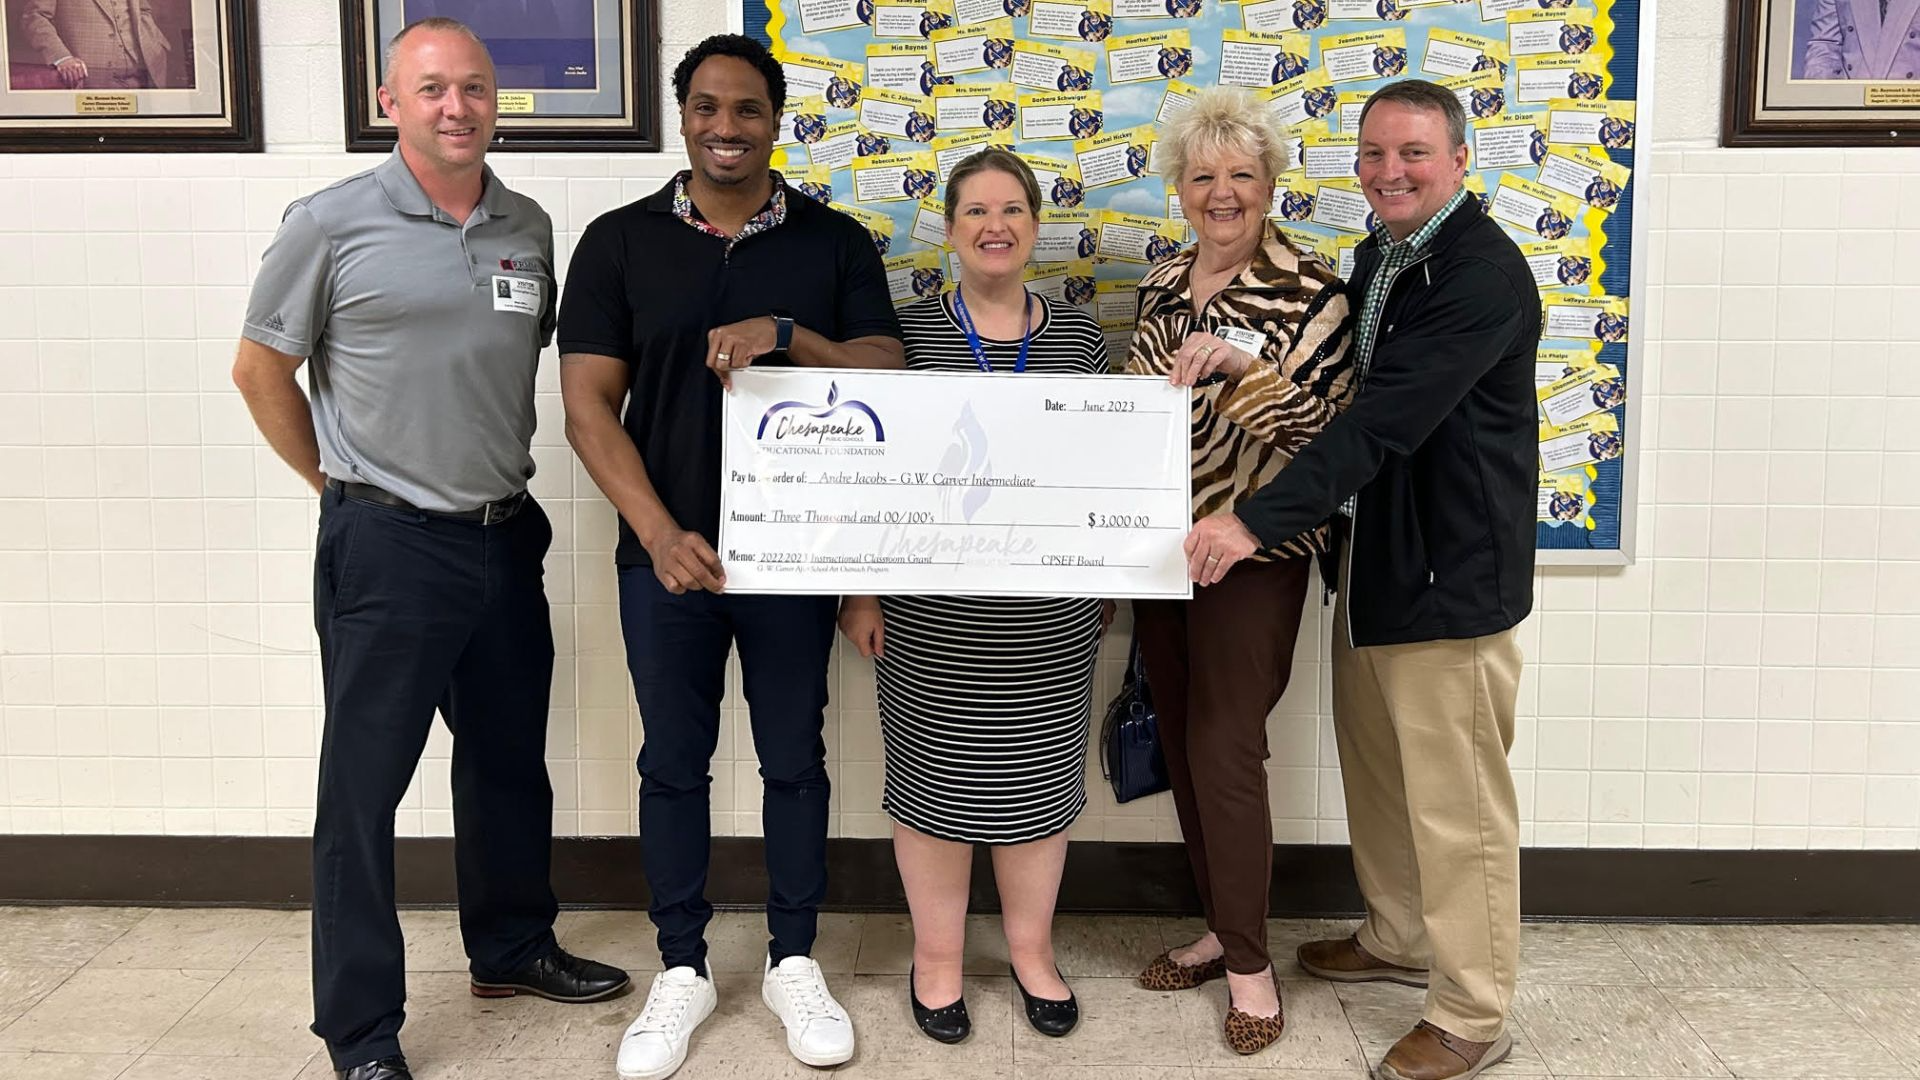 Teacher receives a grant from CPSEF